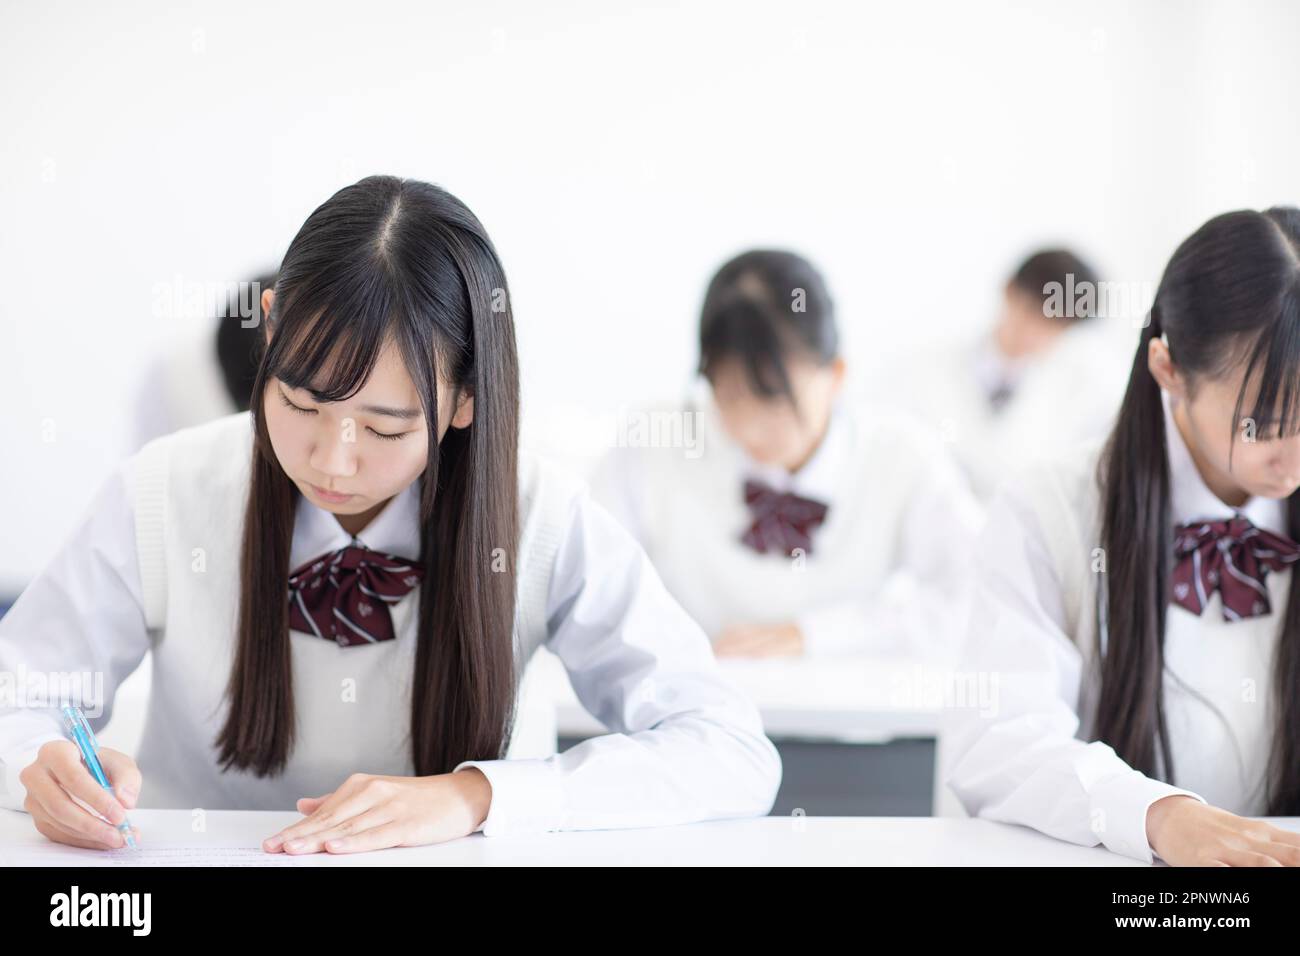 High School Student in Class Stock Photo